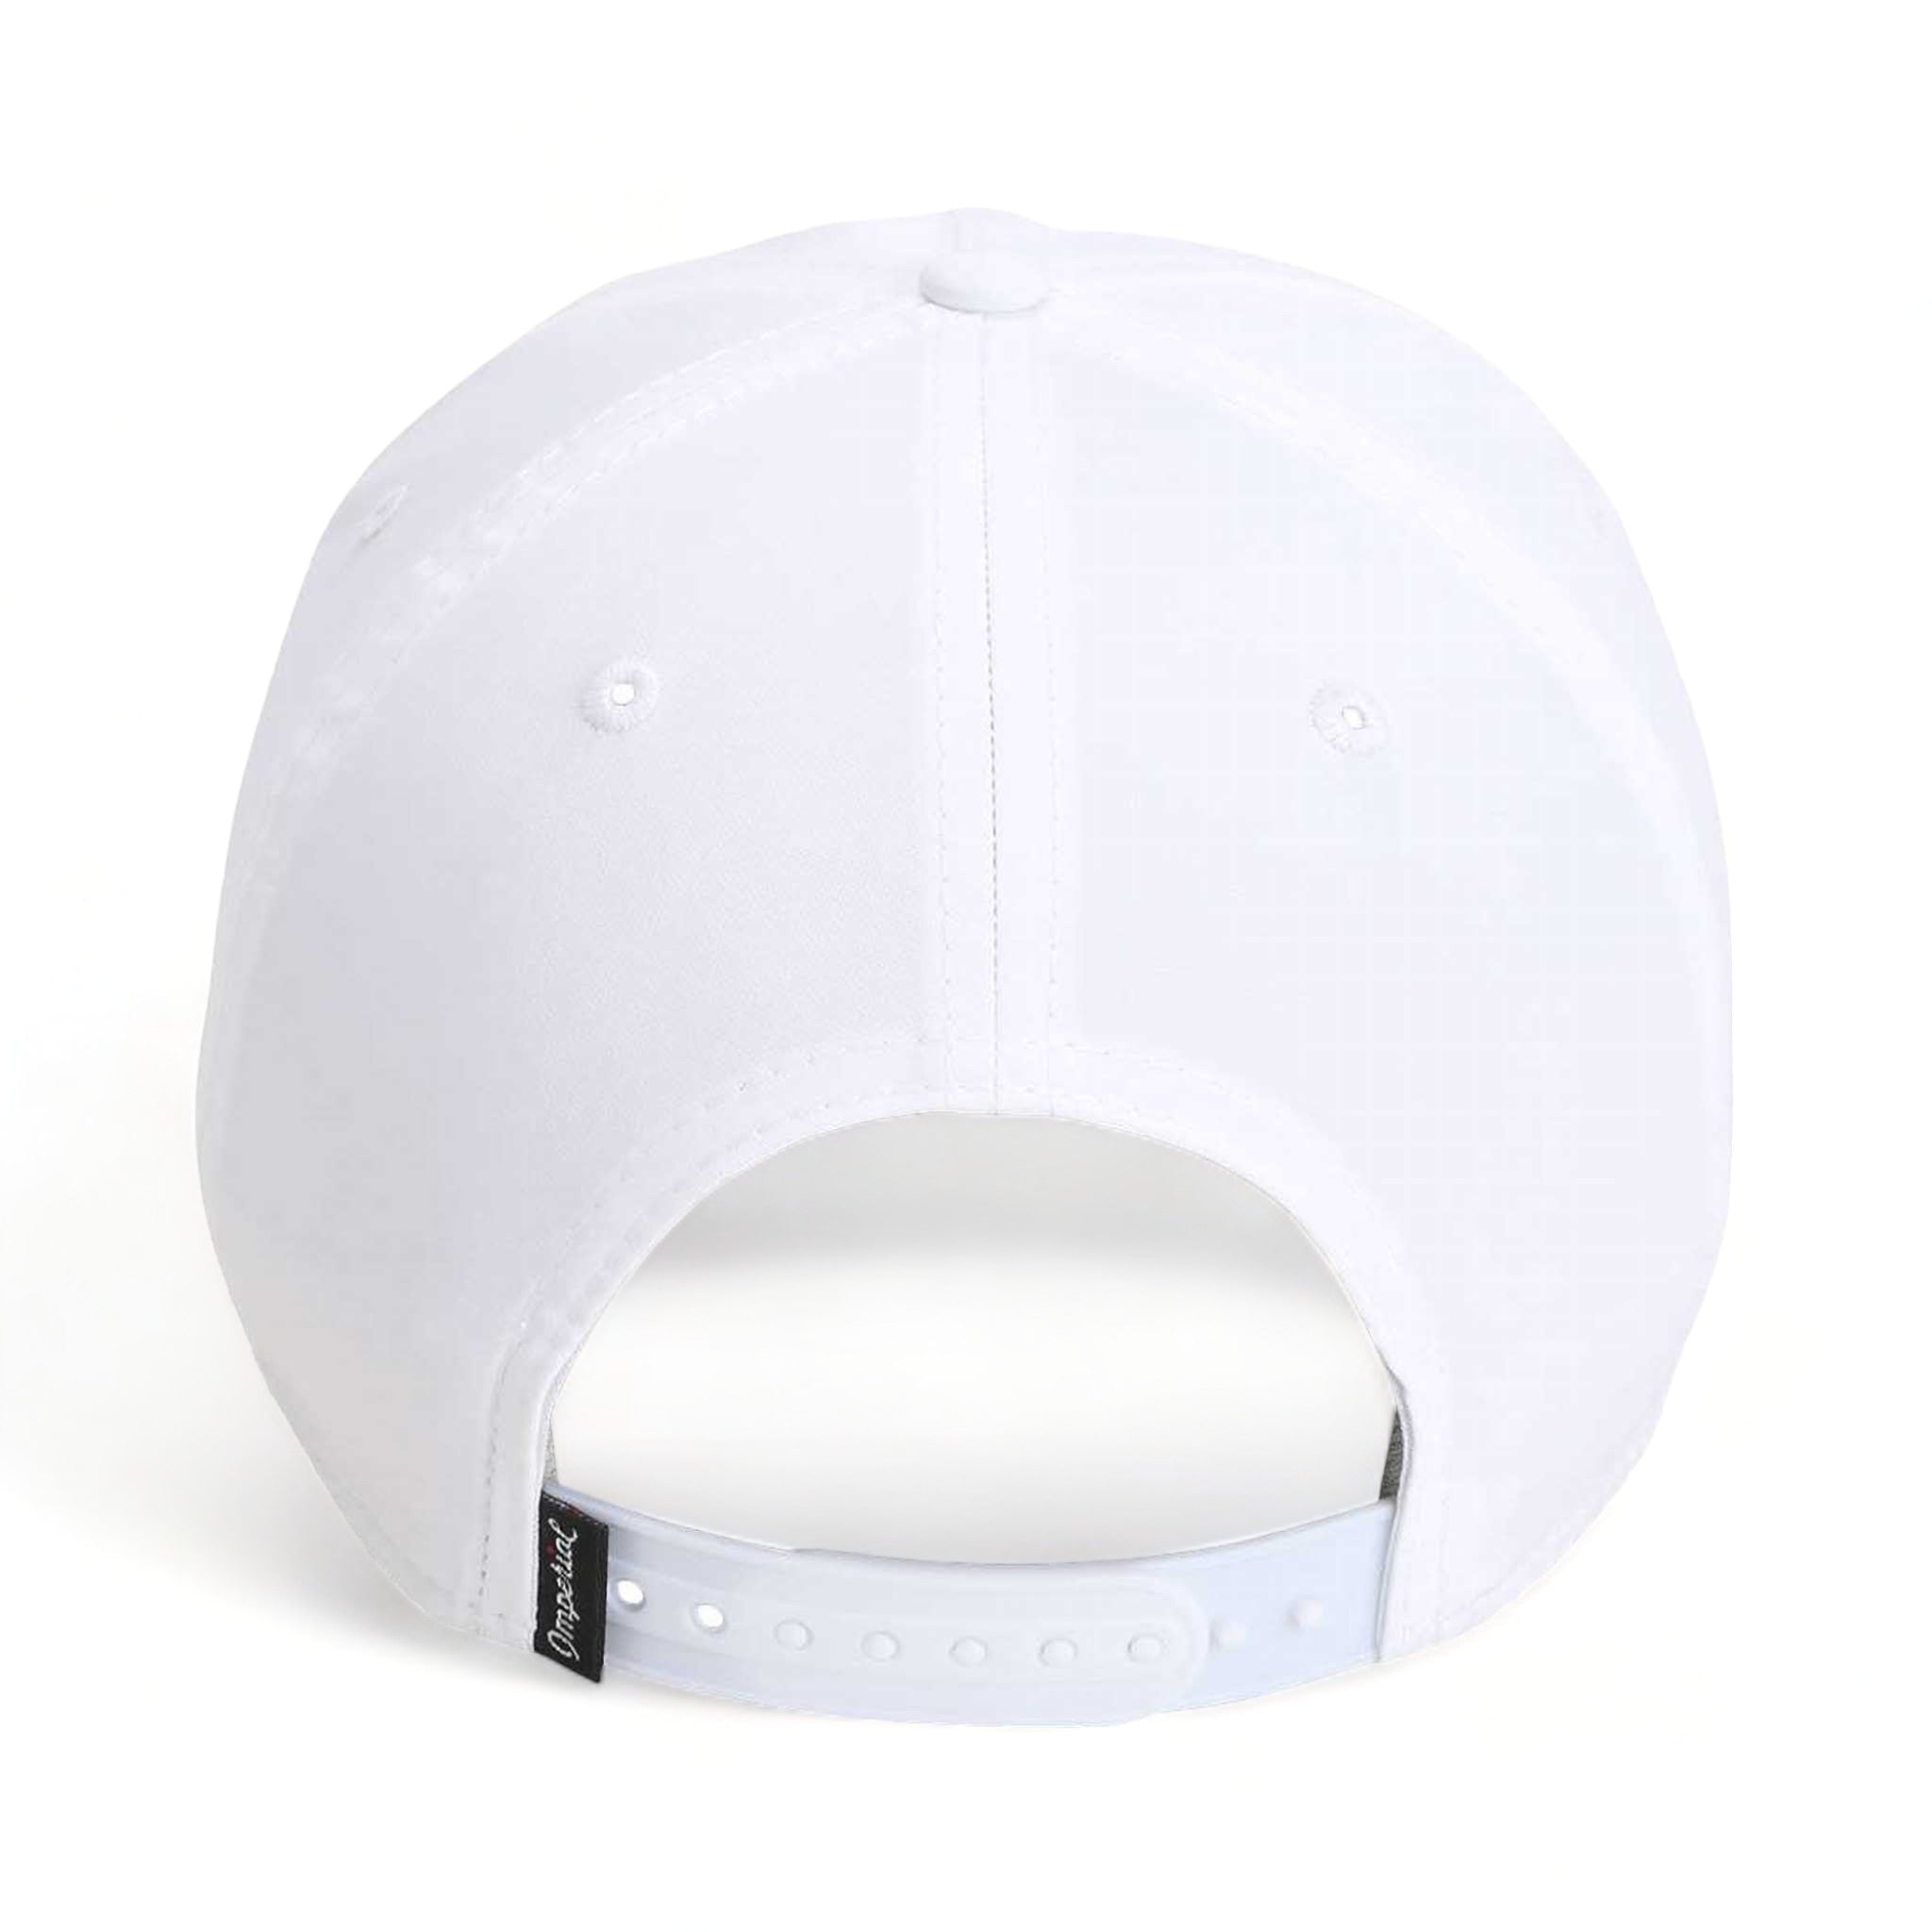 Back view of Imperial 5054 custom hat in white and navy